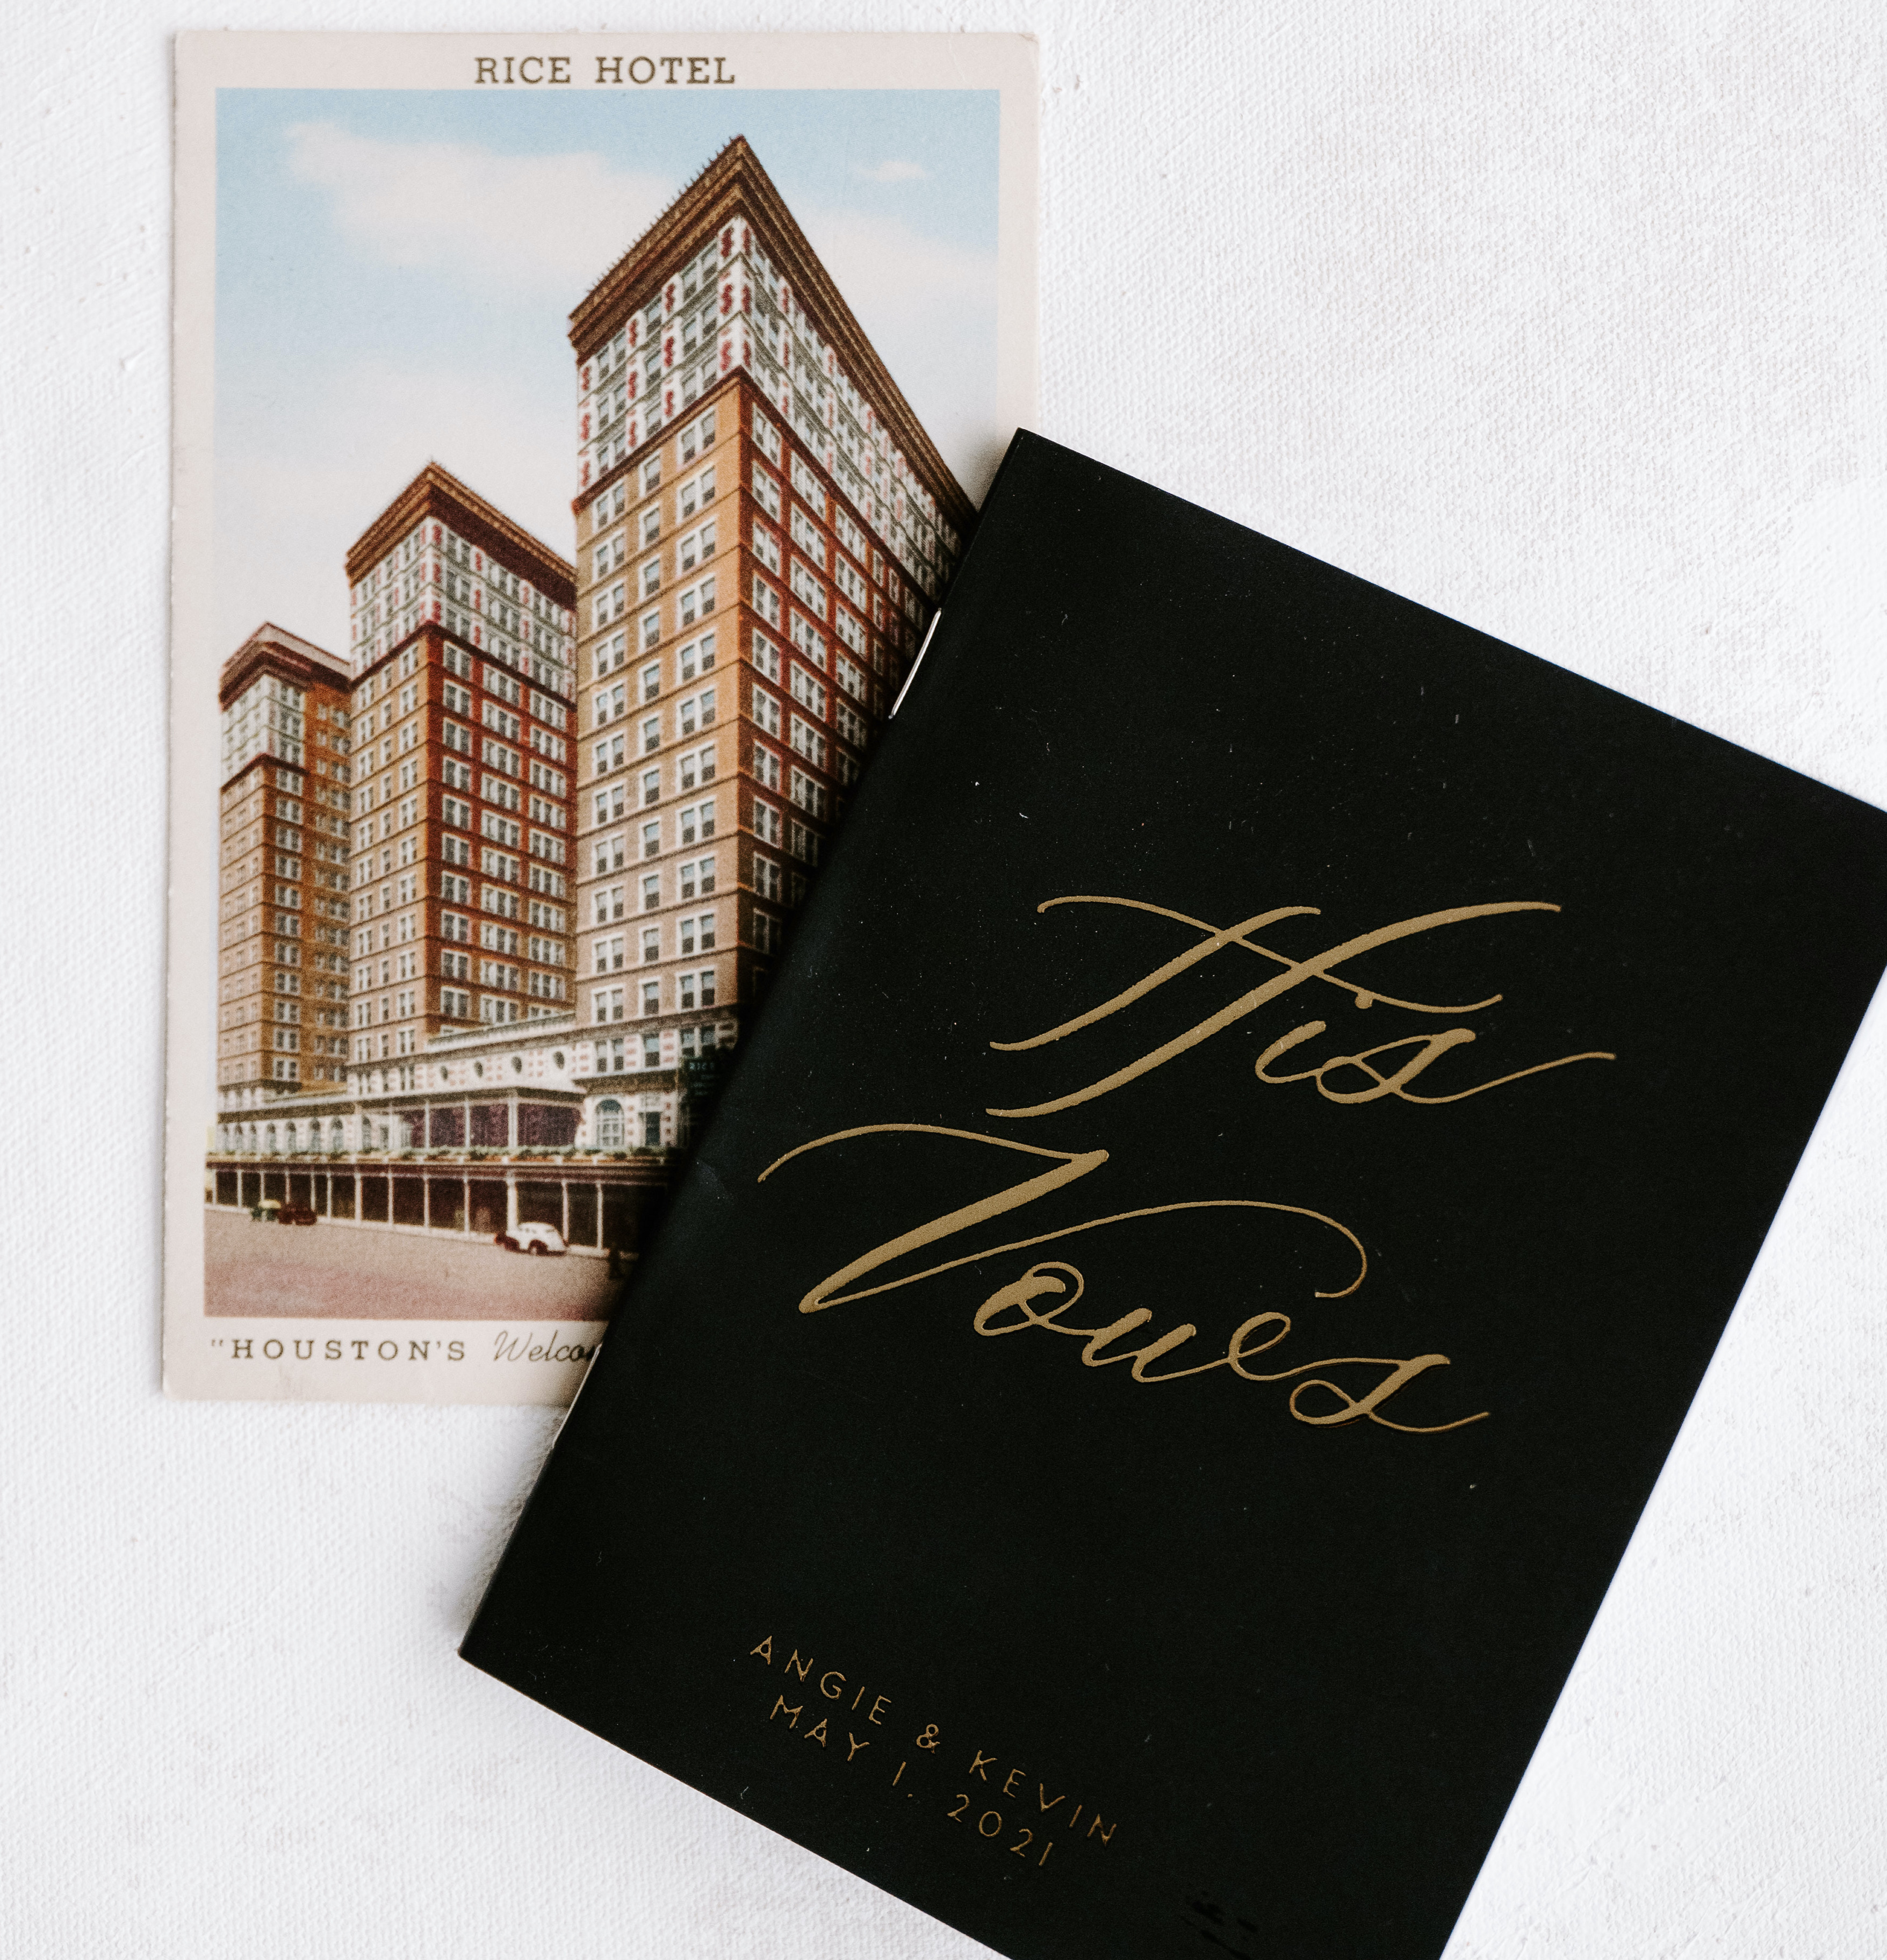 The groom's vows and a Rice Hotel postcard.